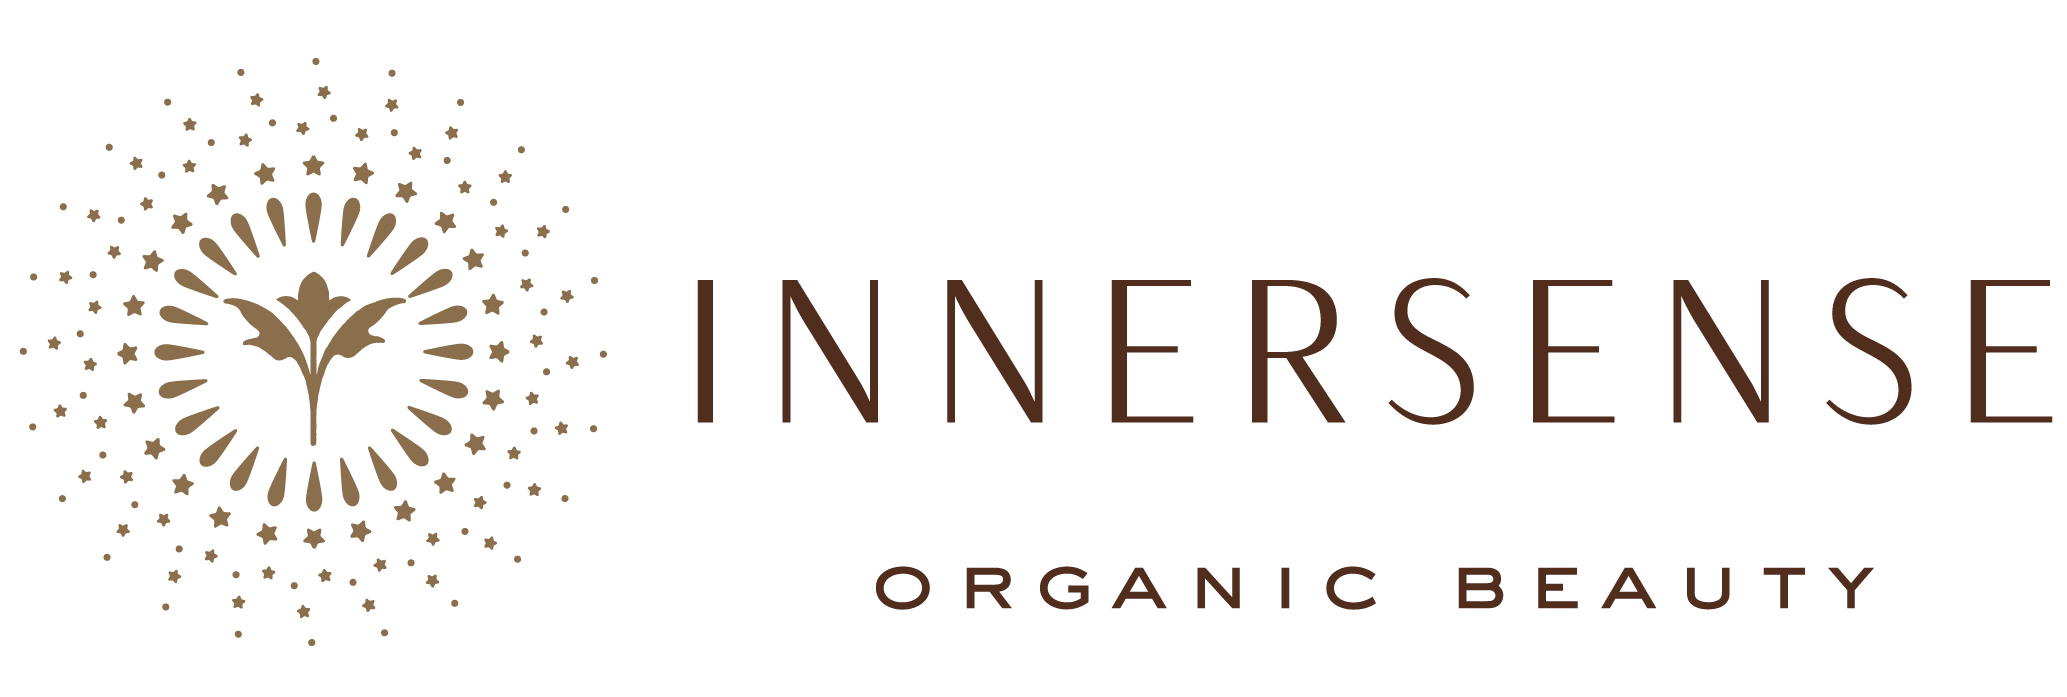 Innersense Organic Beauty Achieves Climate Neutral Certification